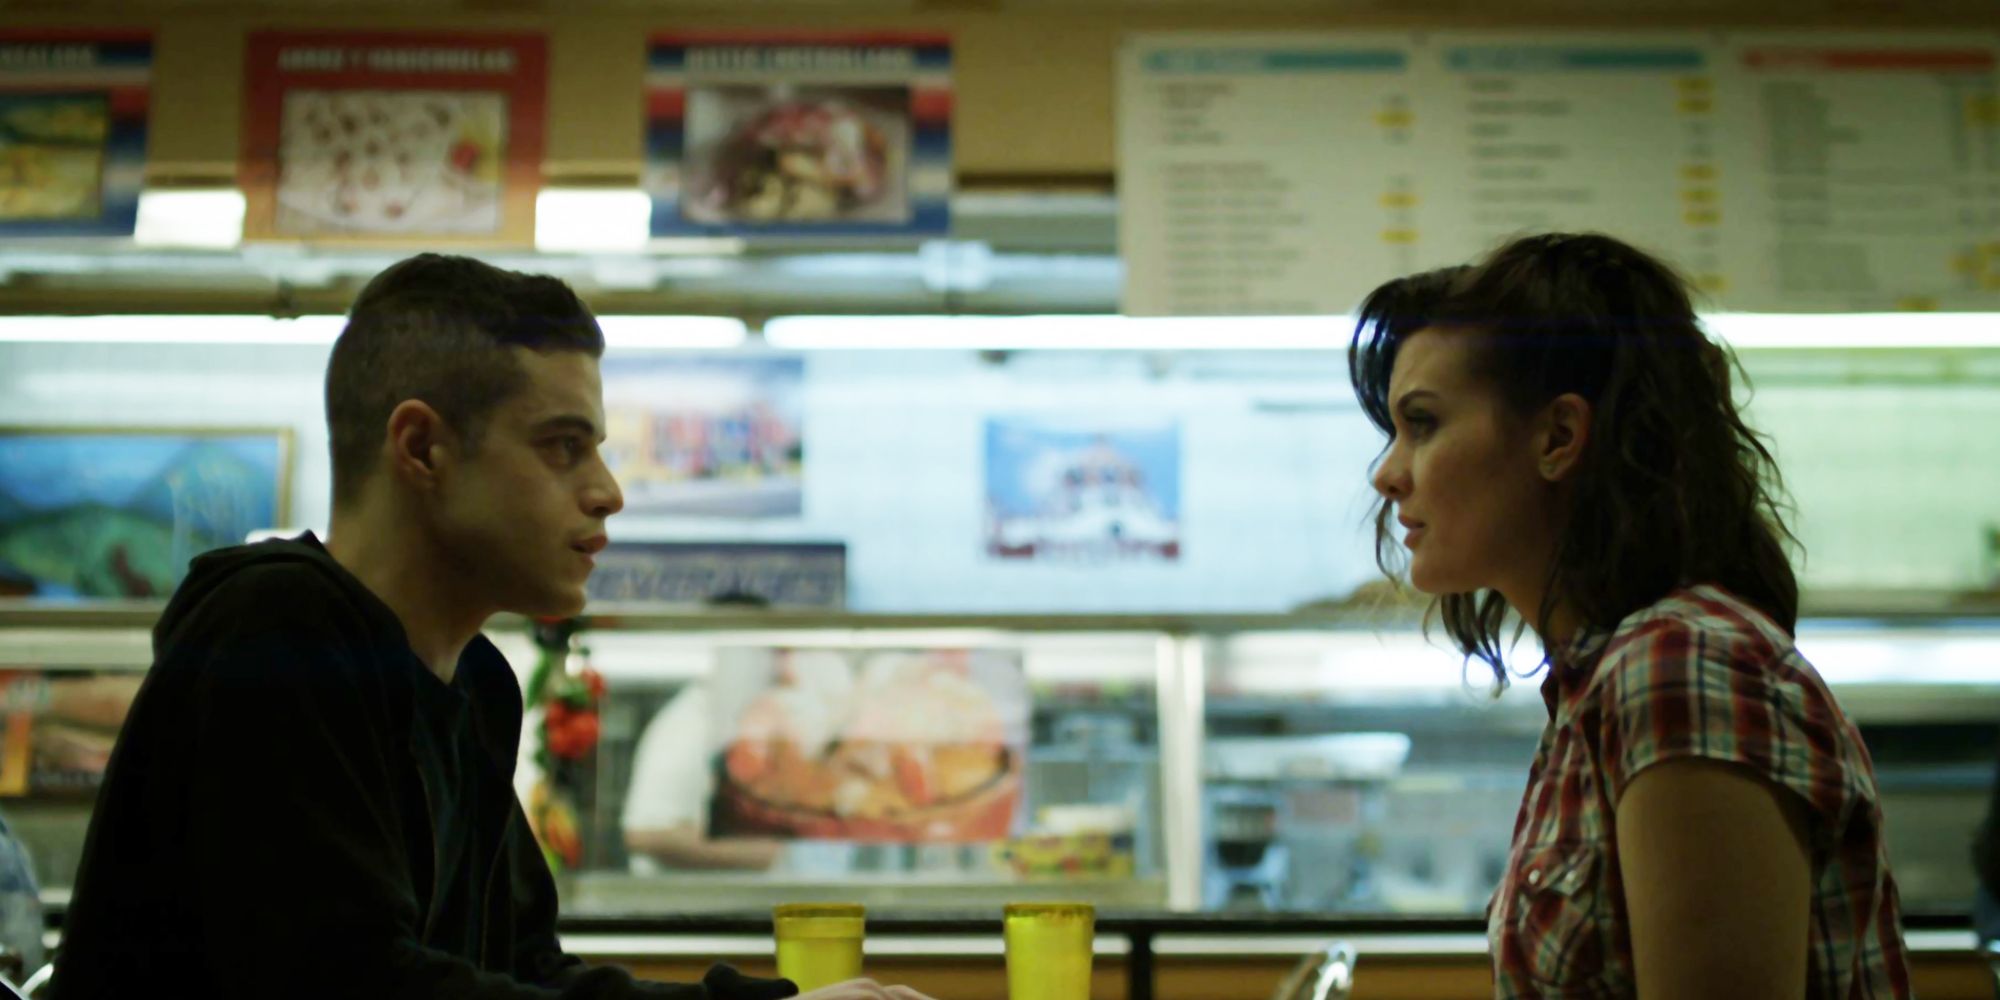 Elliot sitting across from his girlfriend in a diner in a scene from Mr. Robot.